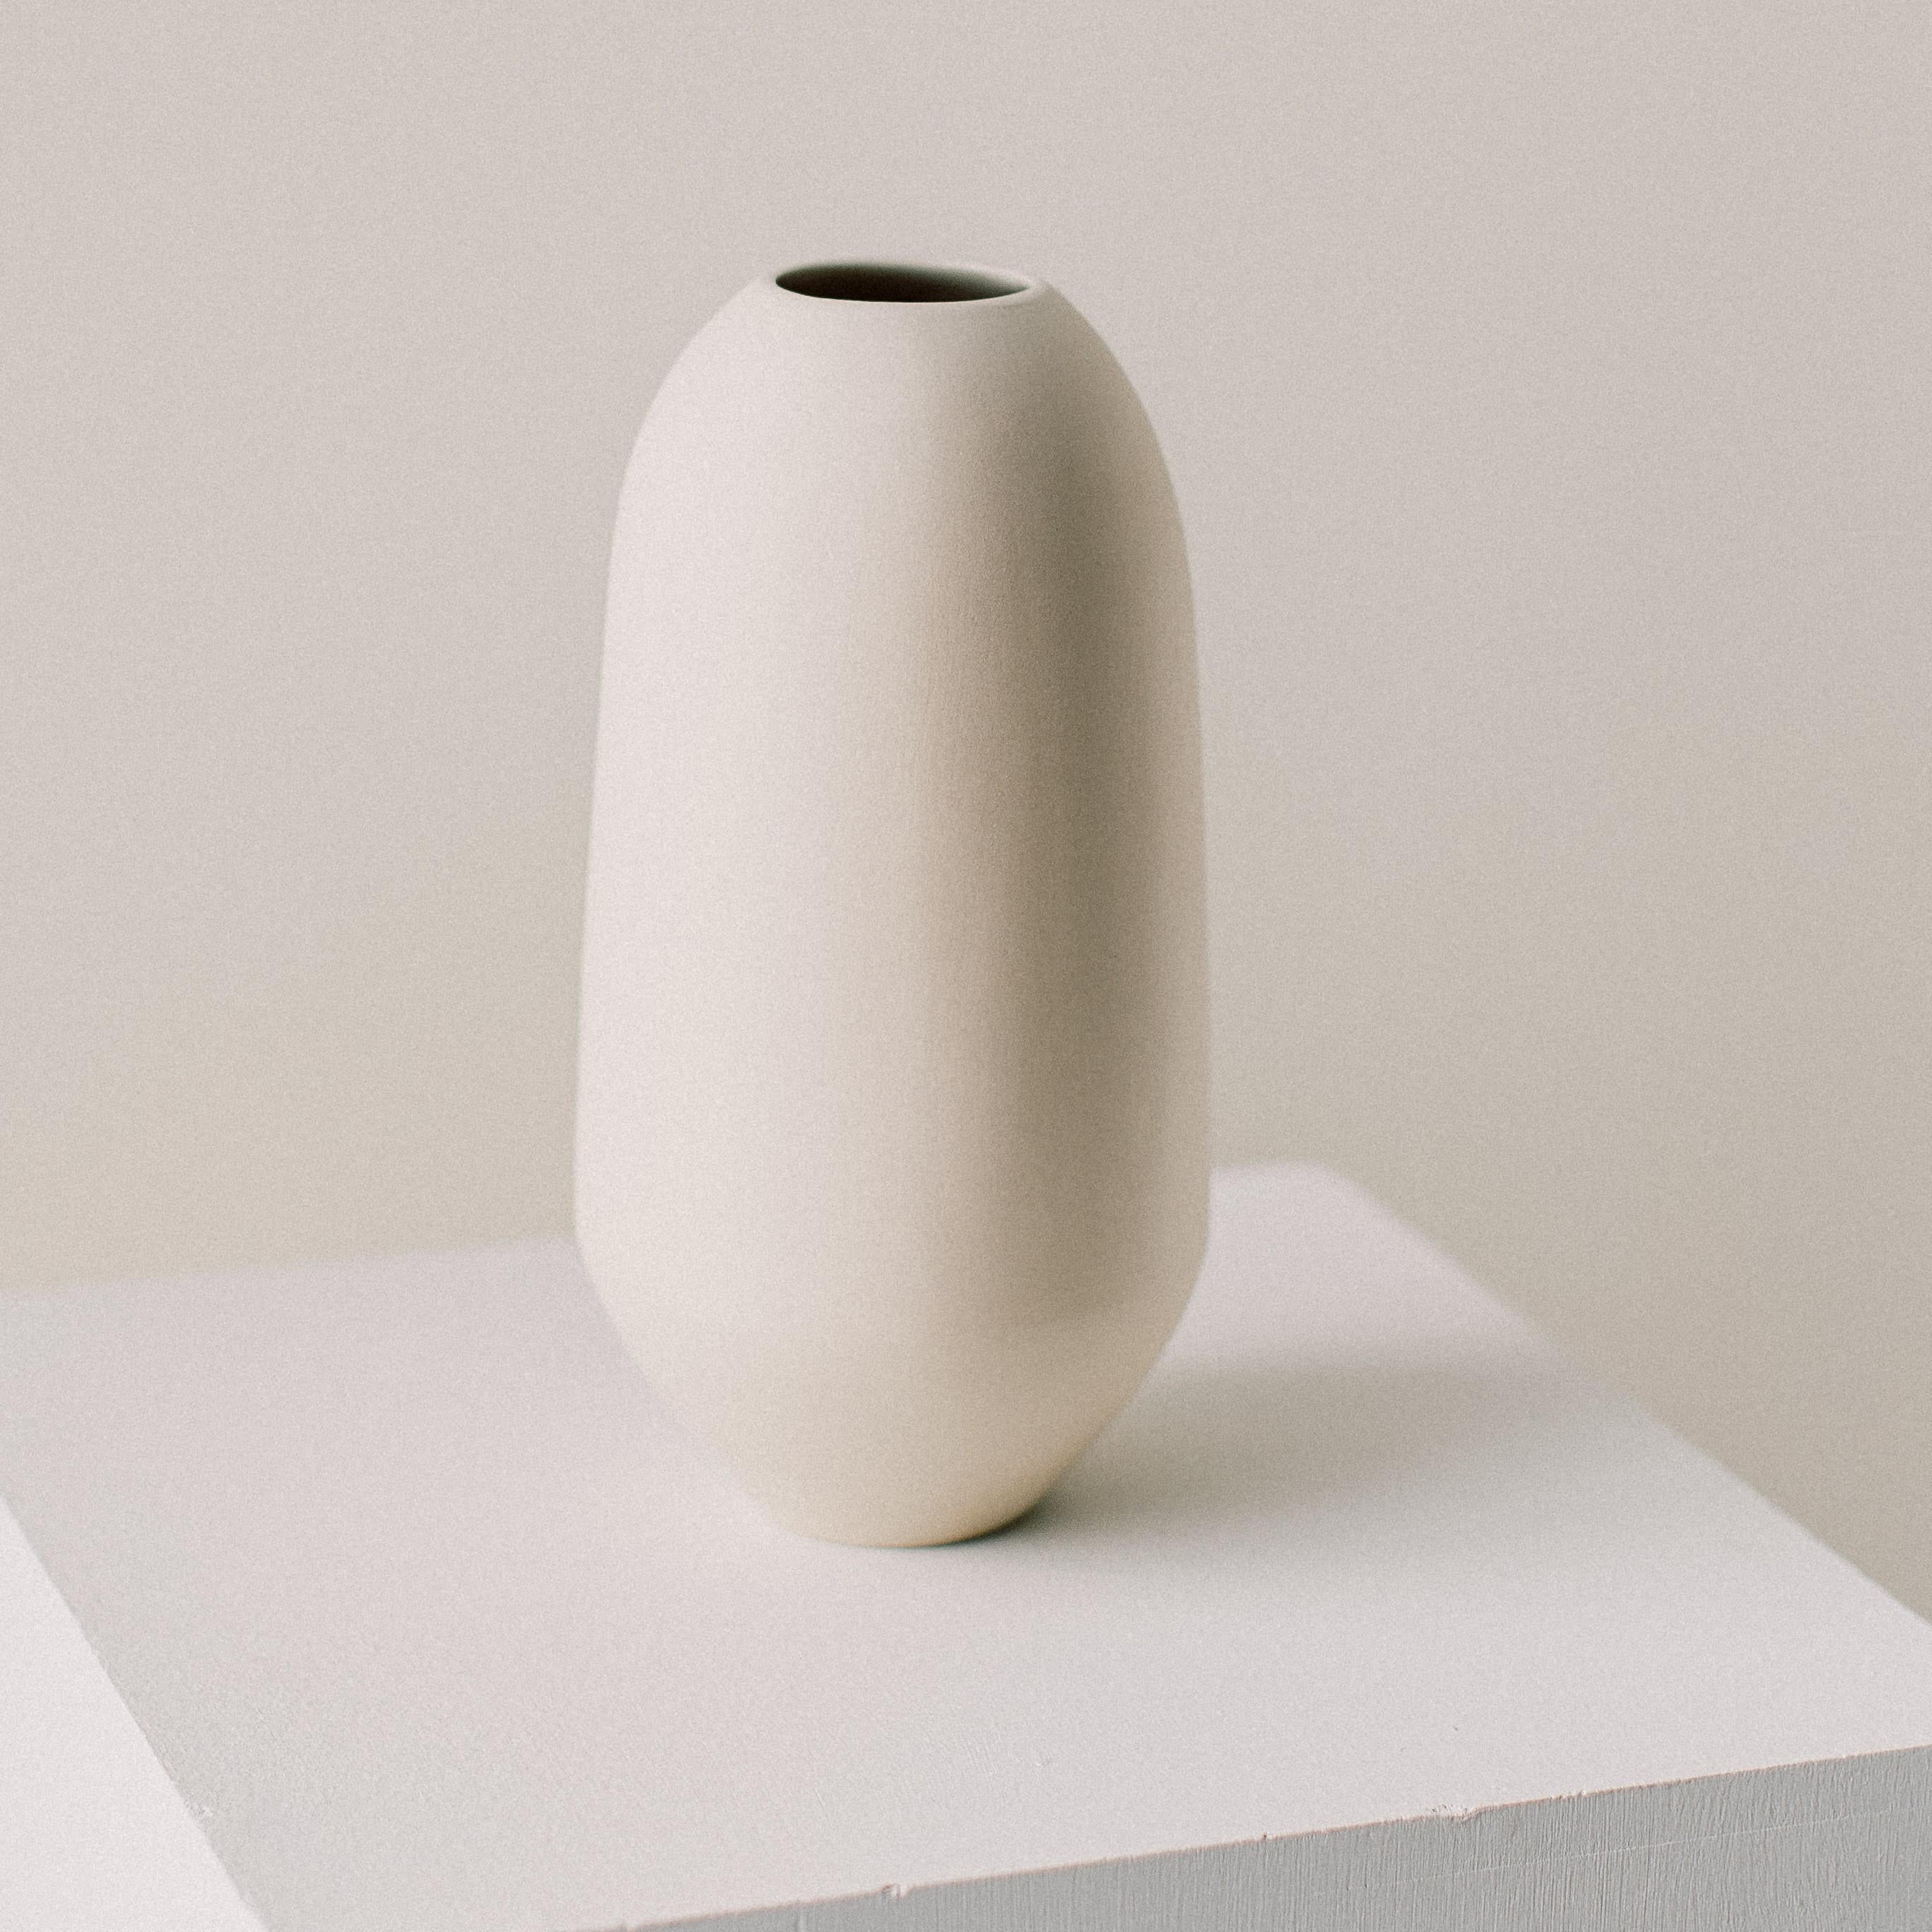 Matriarch vessel by Dust and Form
Dimensions: D 80 x 11.4 H cm
Materials: Porcelain

Origin Form Collection in three finishes: hand-sanded (our classic, smooth, bare finish) Ivory (satin white glaze) Charcoal (matte black glaze). 

A form to